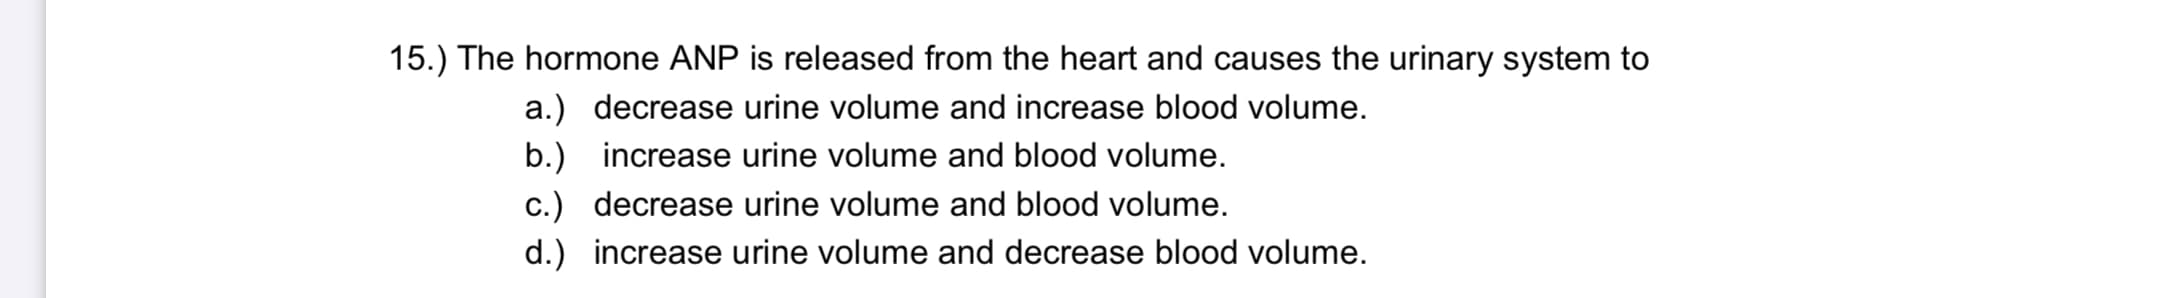 The hormone ANP is released from the heart and causes the urinary system to
a.) decrease urine volume and increase blood volume.
b.) increase urine volume and blood volume.
c.) decrease urine volume and blood volume.
d.) increase urine volume and decrease blood volume.
